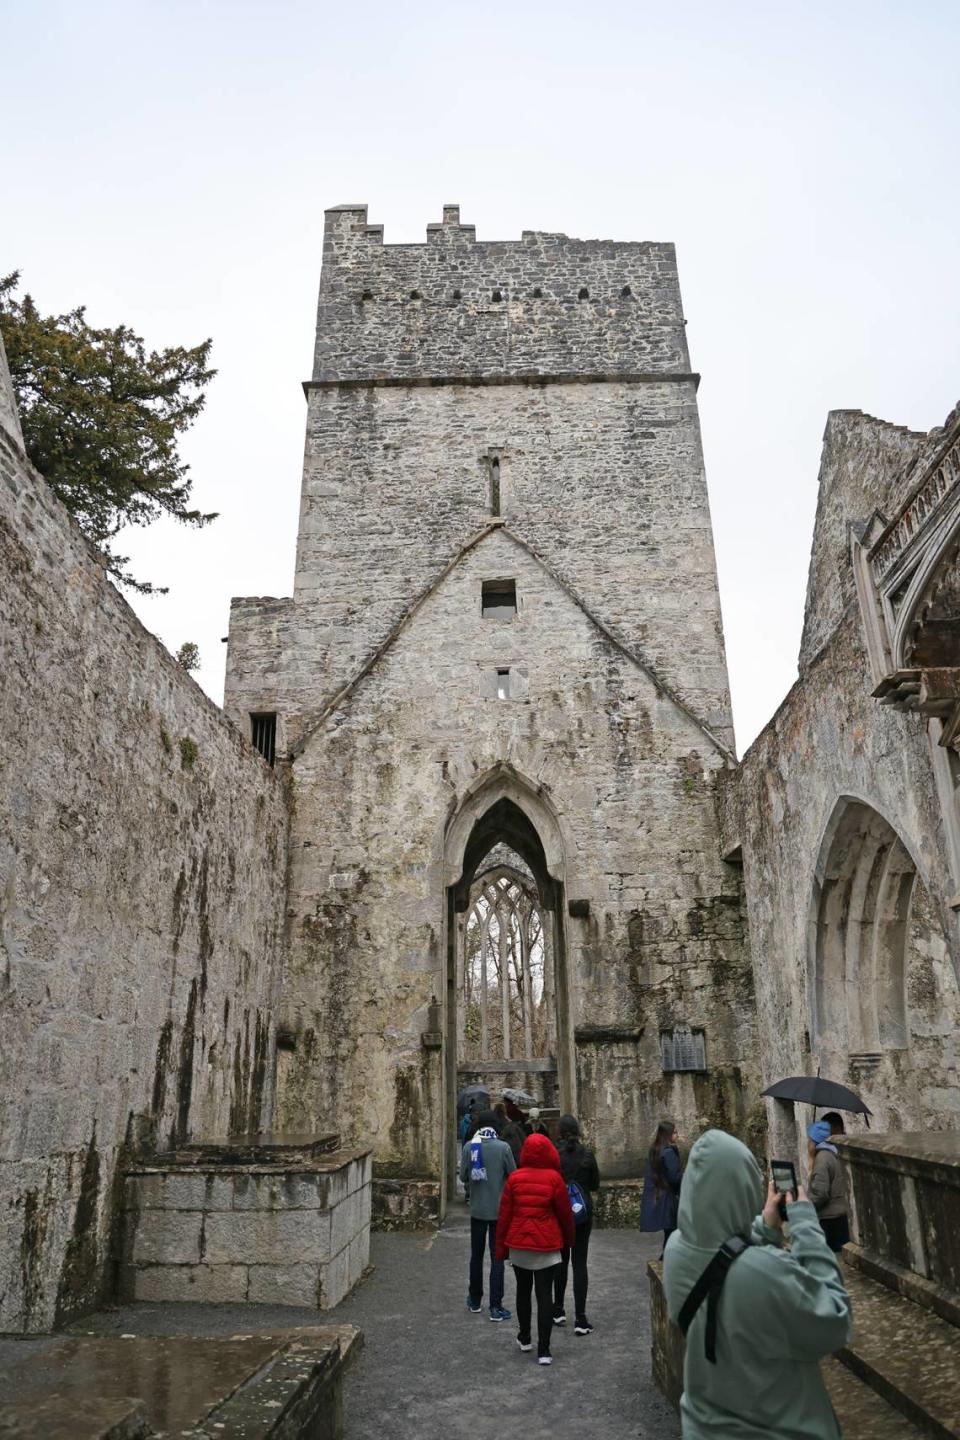 Students continued tours of the third day in Ireland, which included the Ring of Kerry.